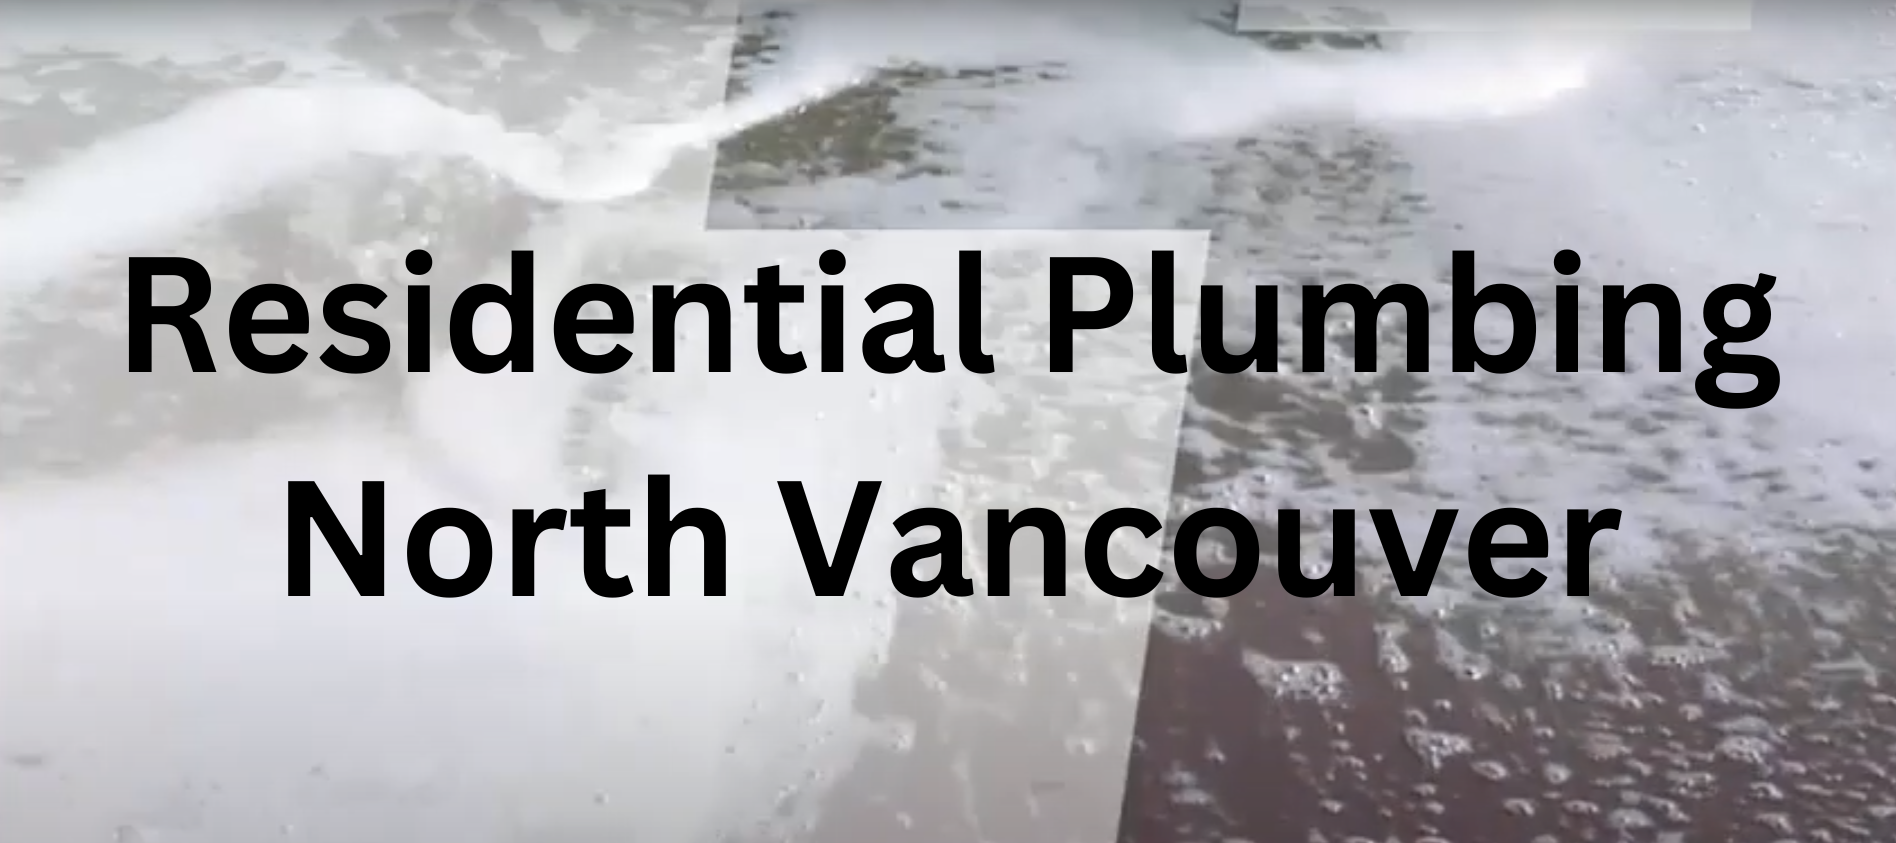 Residential Plumbing North Vancouver